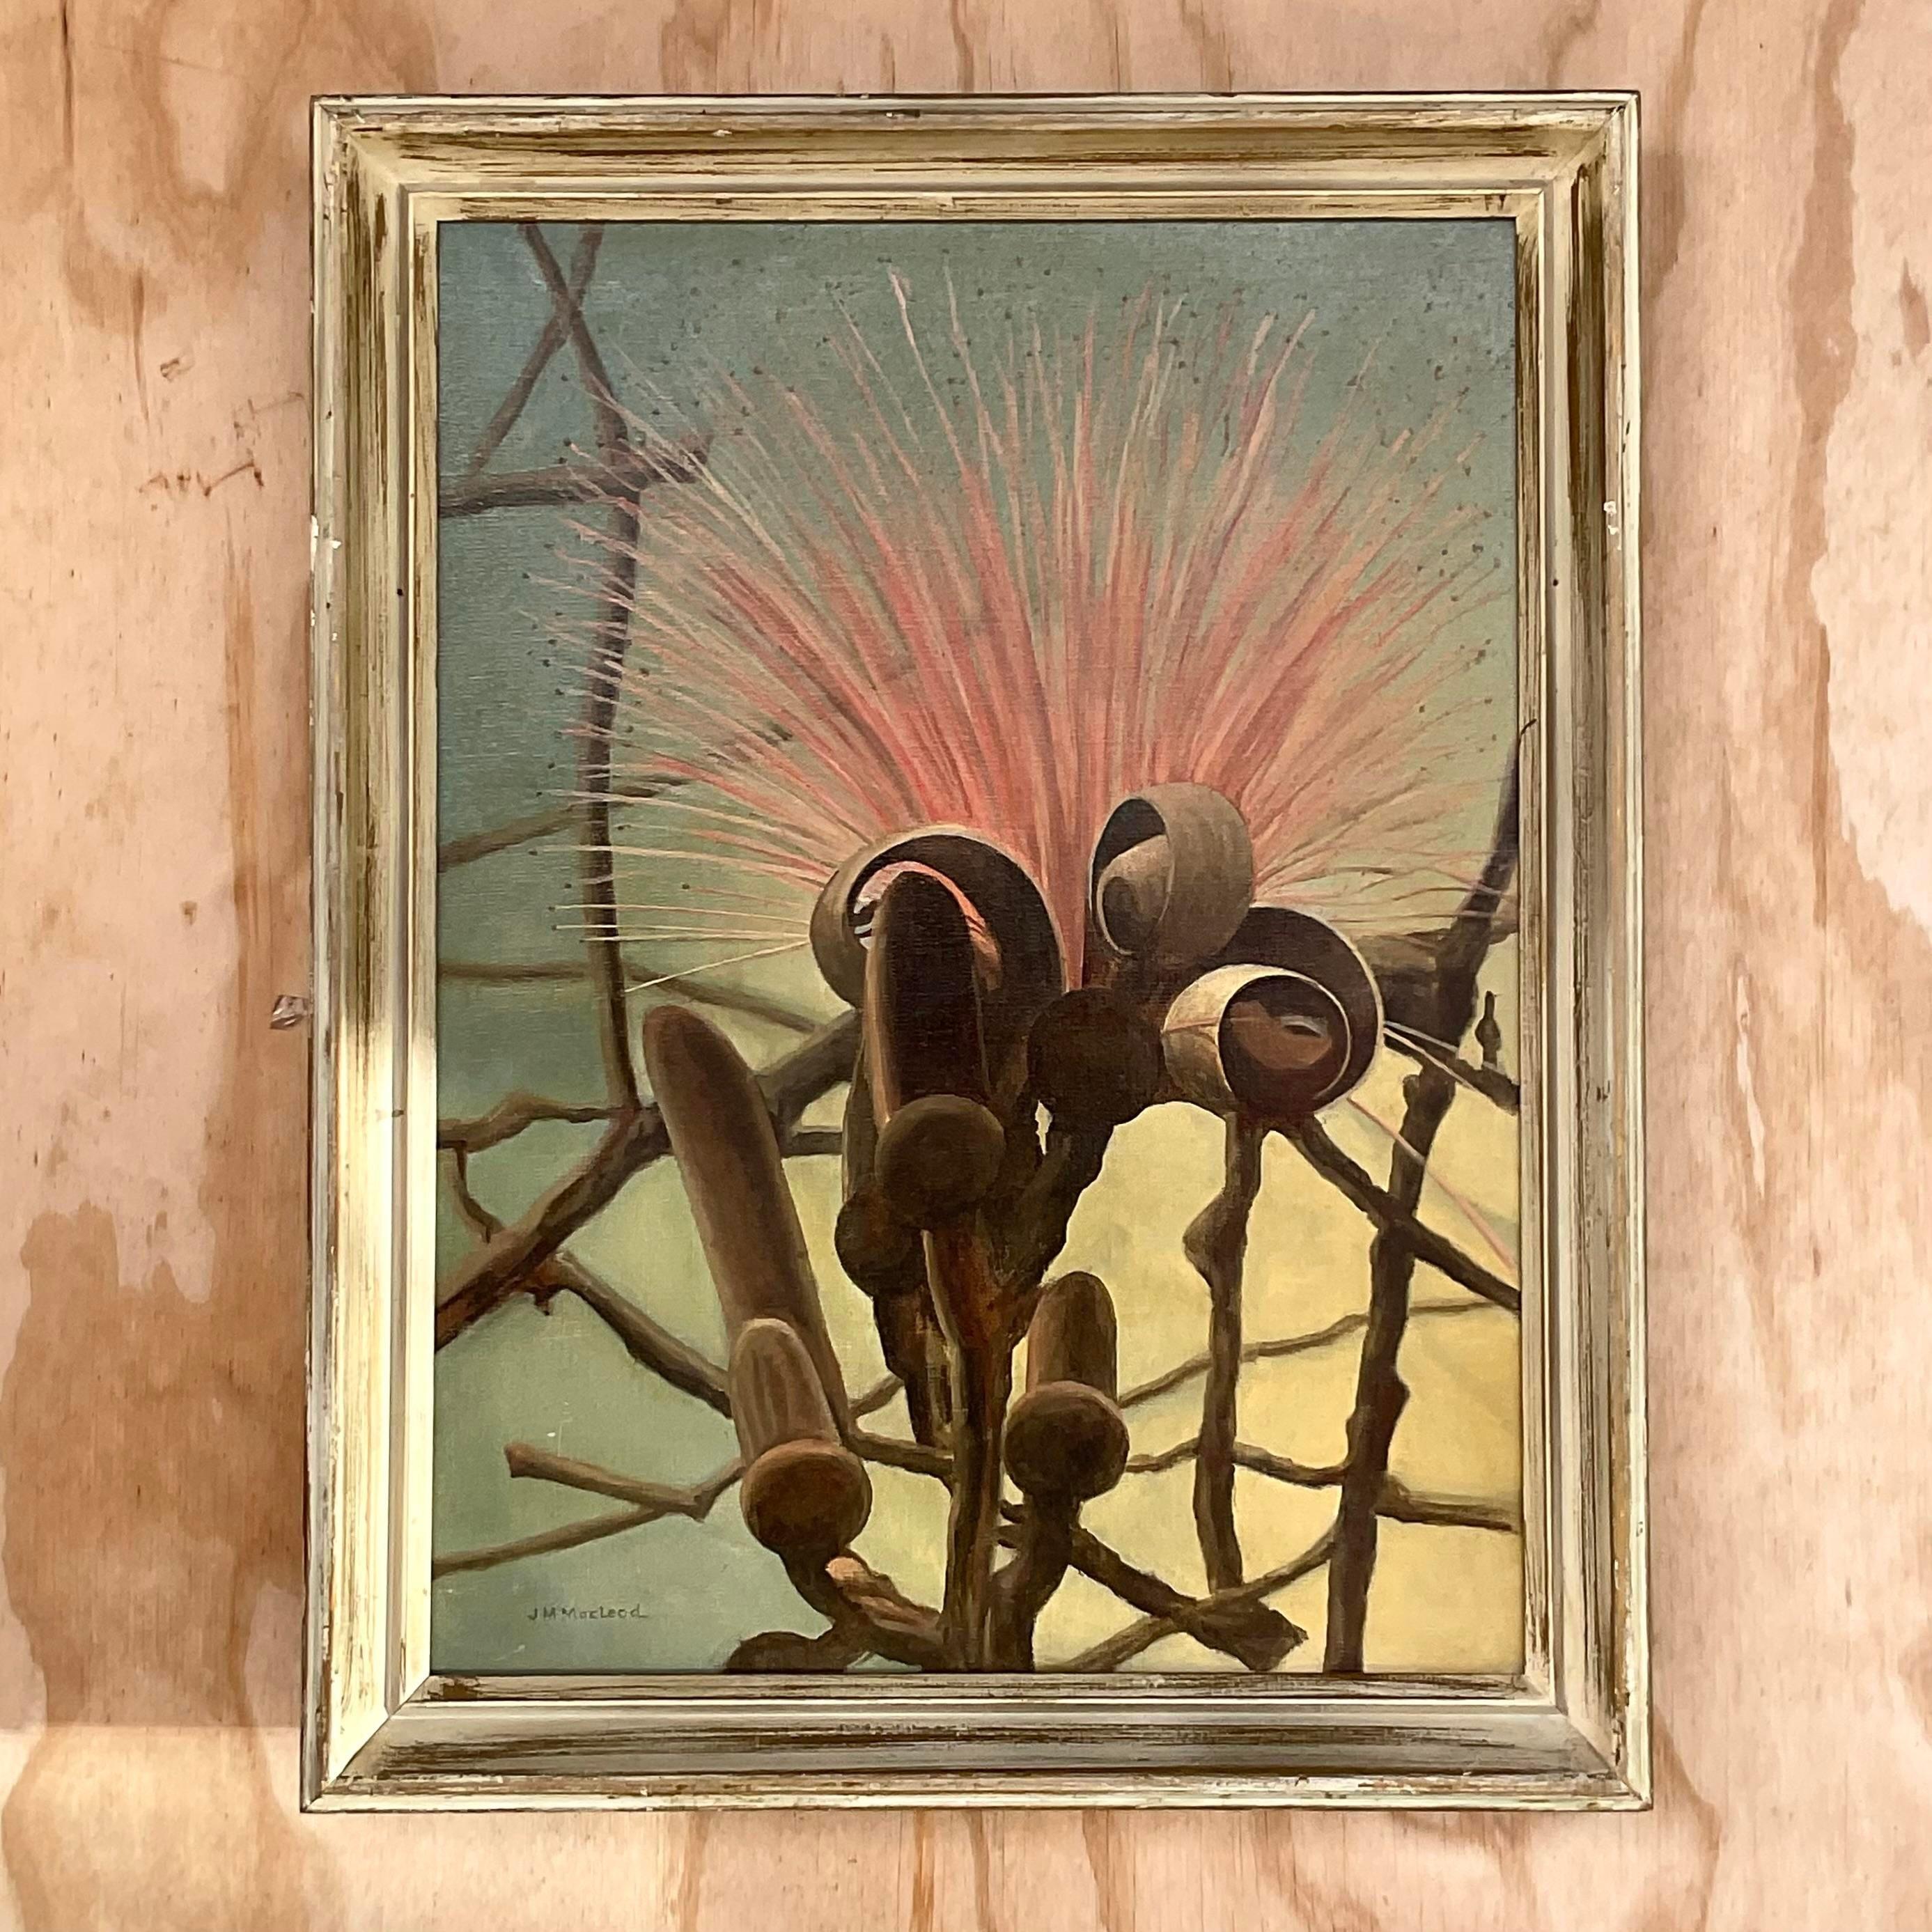 An exceptional vintage Boho original oil painting. A beautiful floral with a space age composition. Brilliant muted colors add to the piece. Signed by the artist J. M. McLeod. Acquired from a Palm Beach estate.